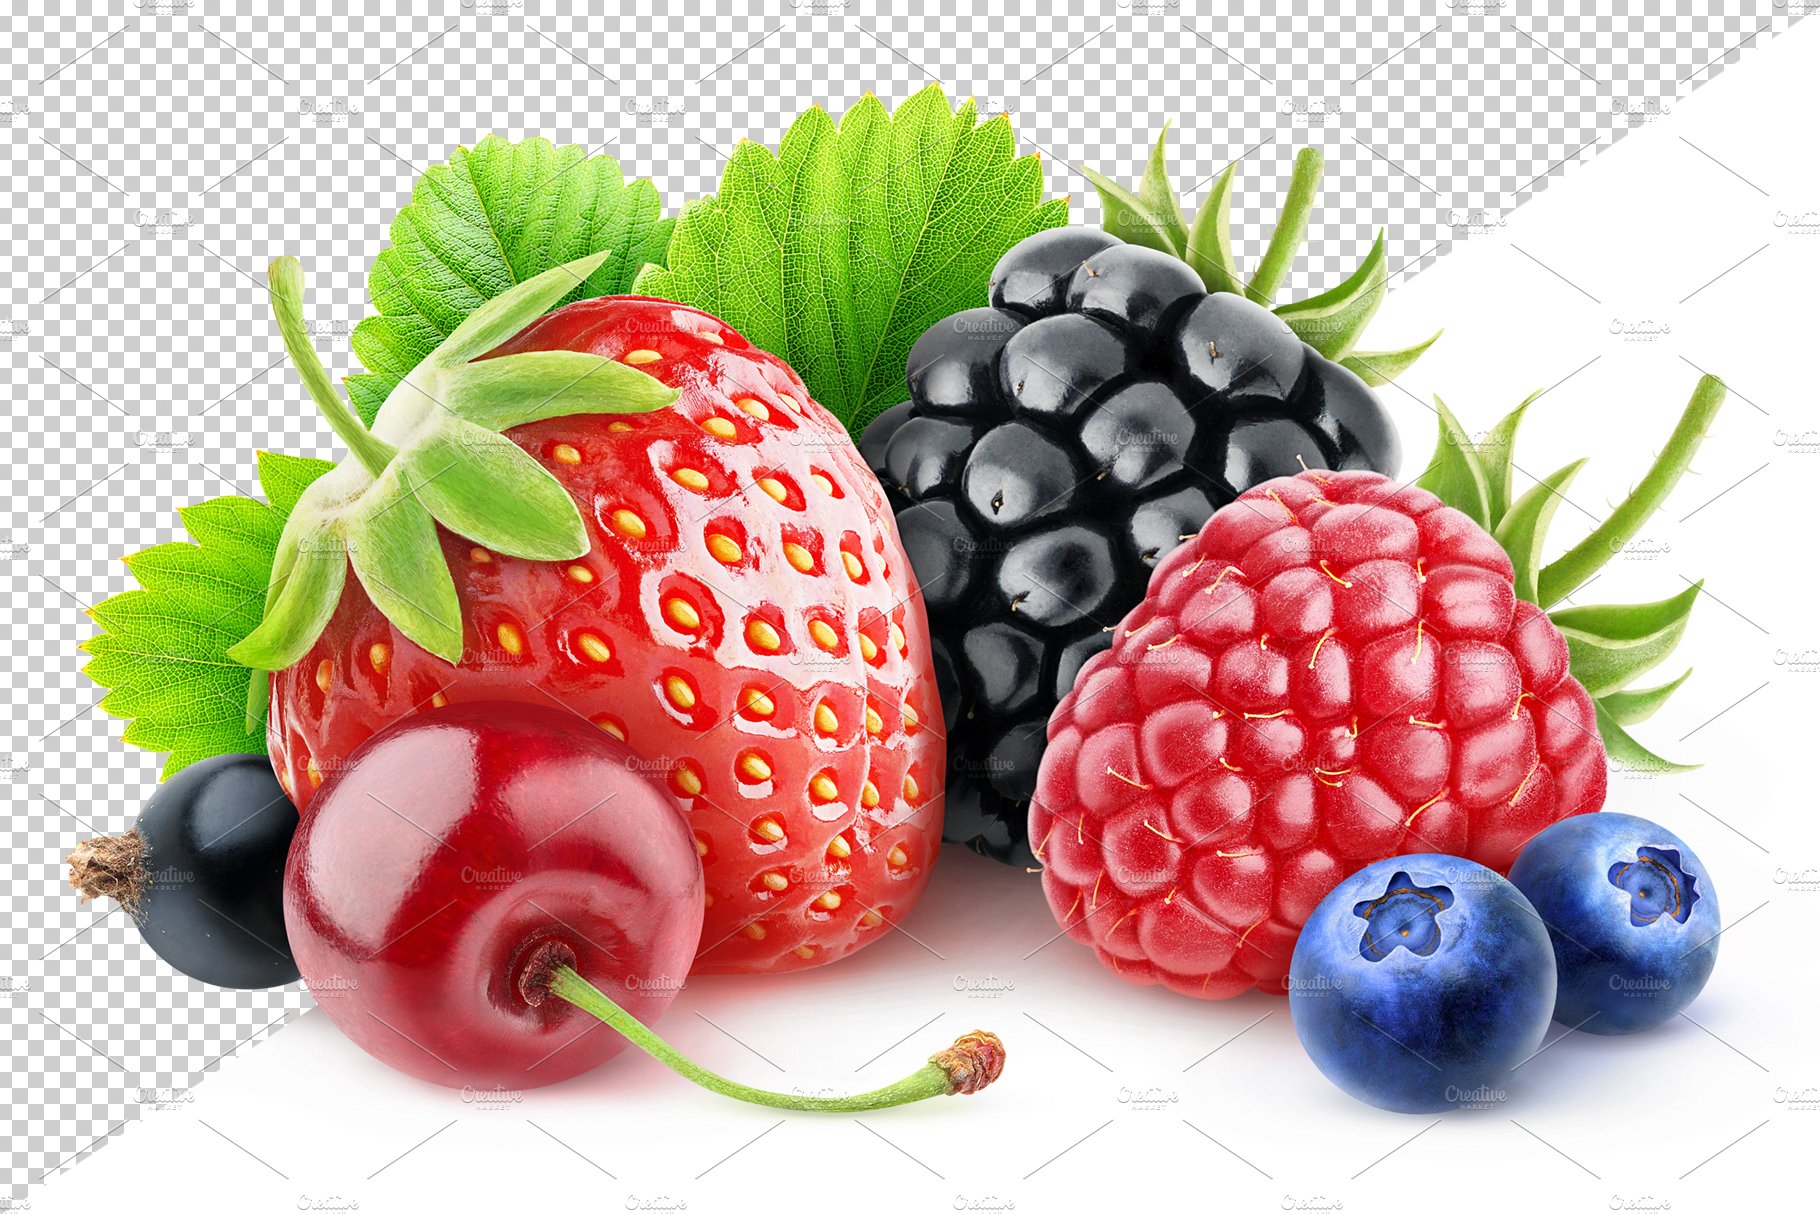 Fresh berries preview image.